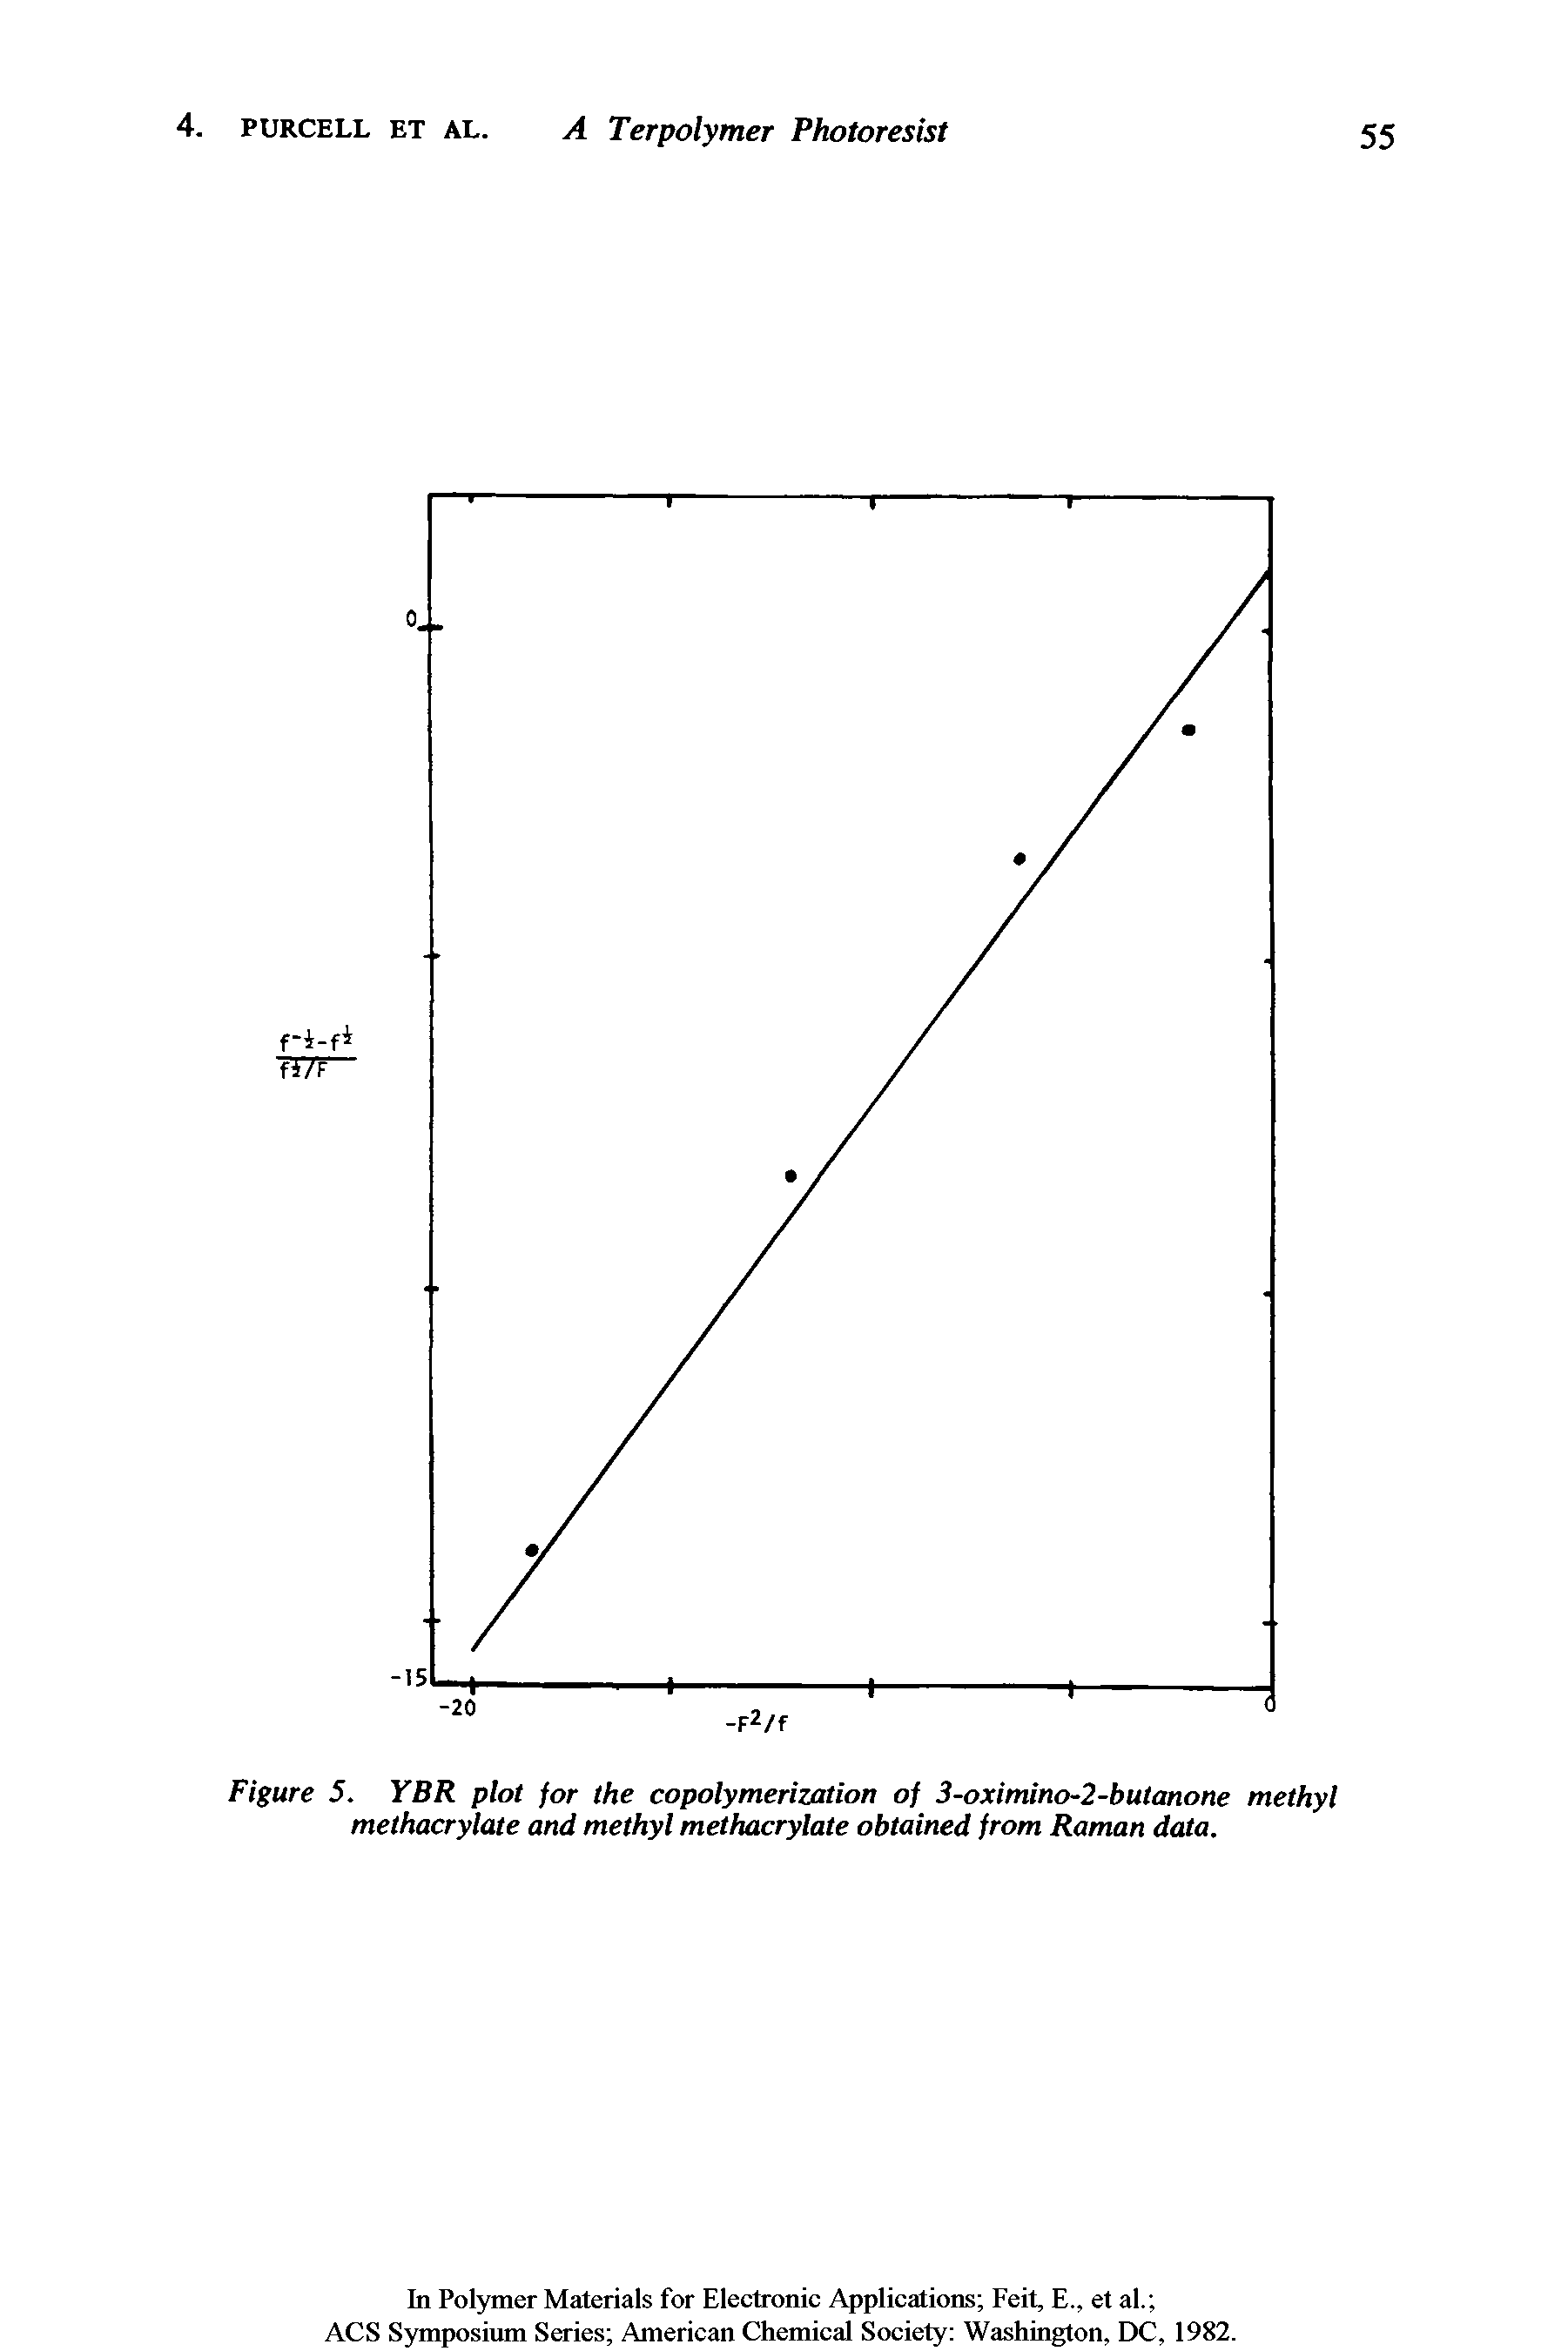 Figure 5. YBR plot for the copolymerization of 3-oximino-2-butanone methyl methacrylate and methyl methacrylate obtained from Raman data.